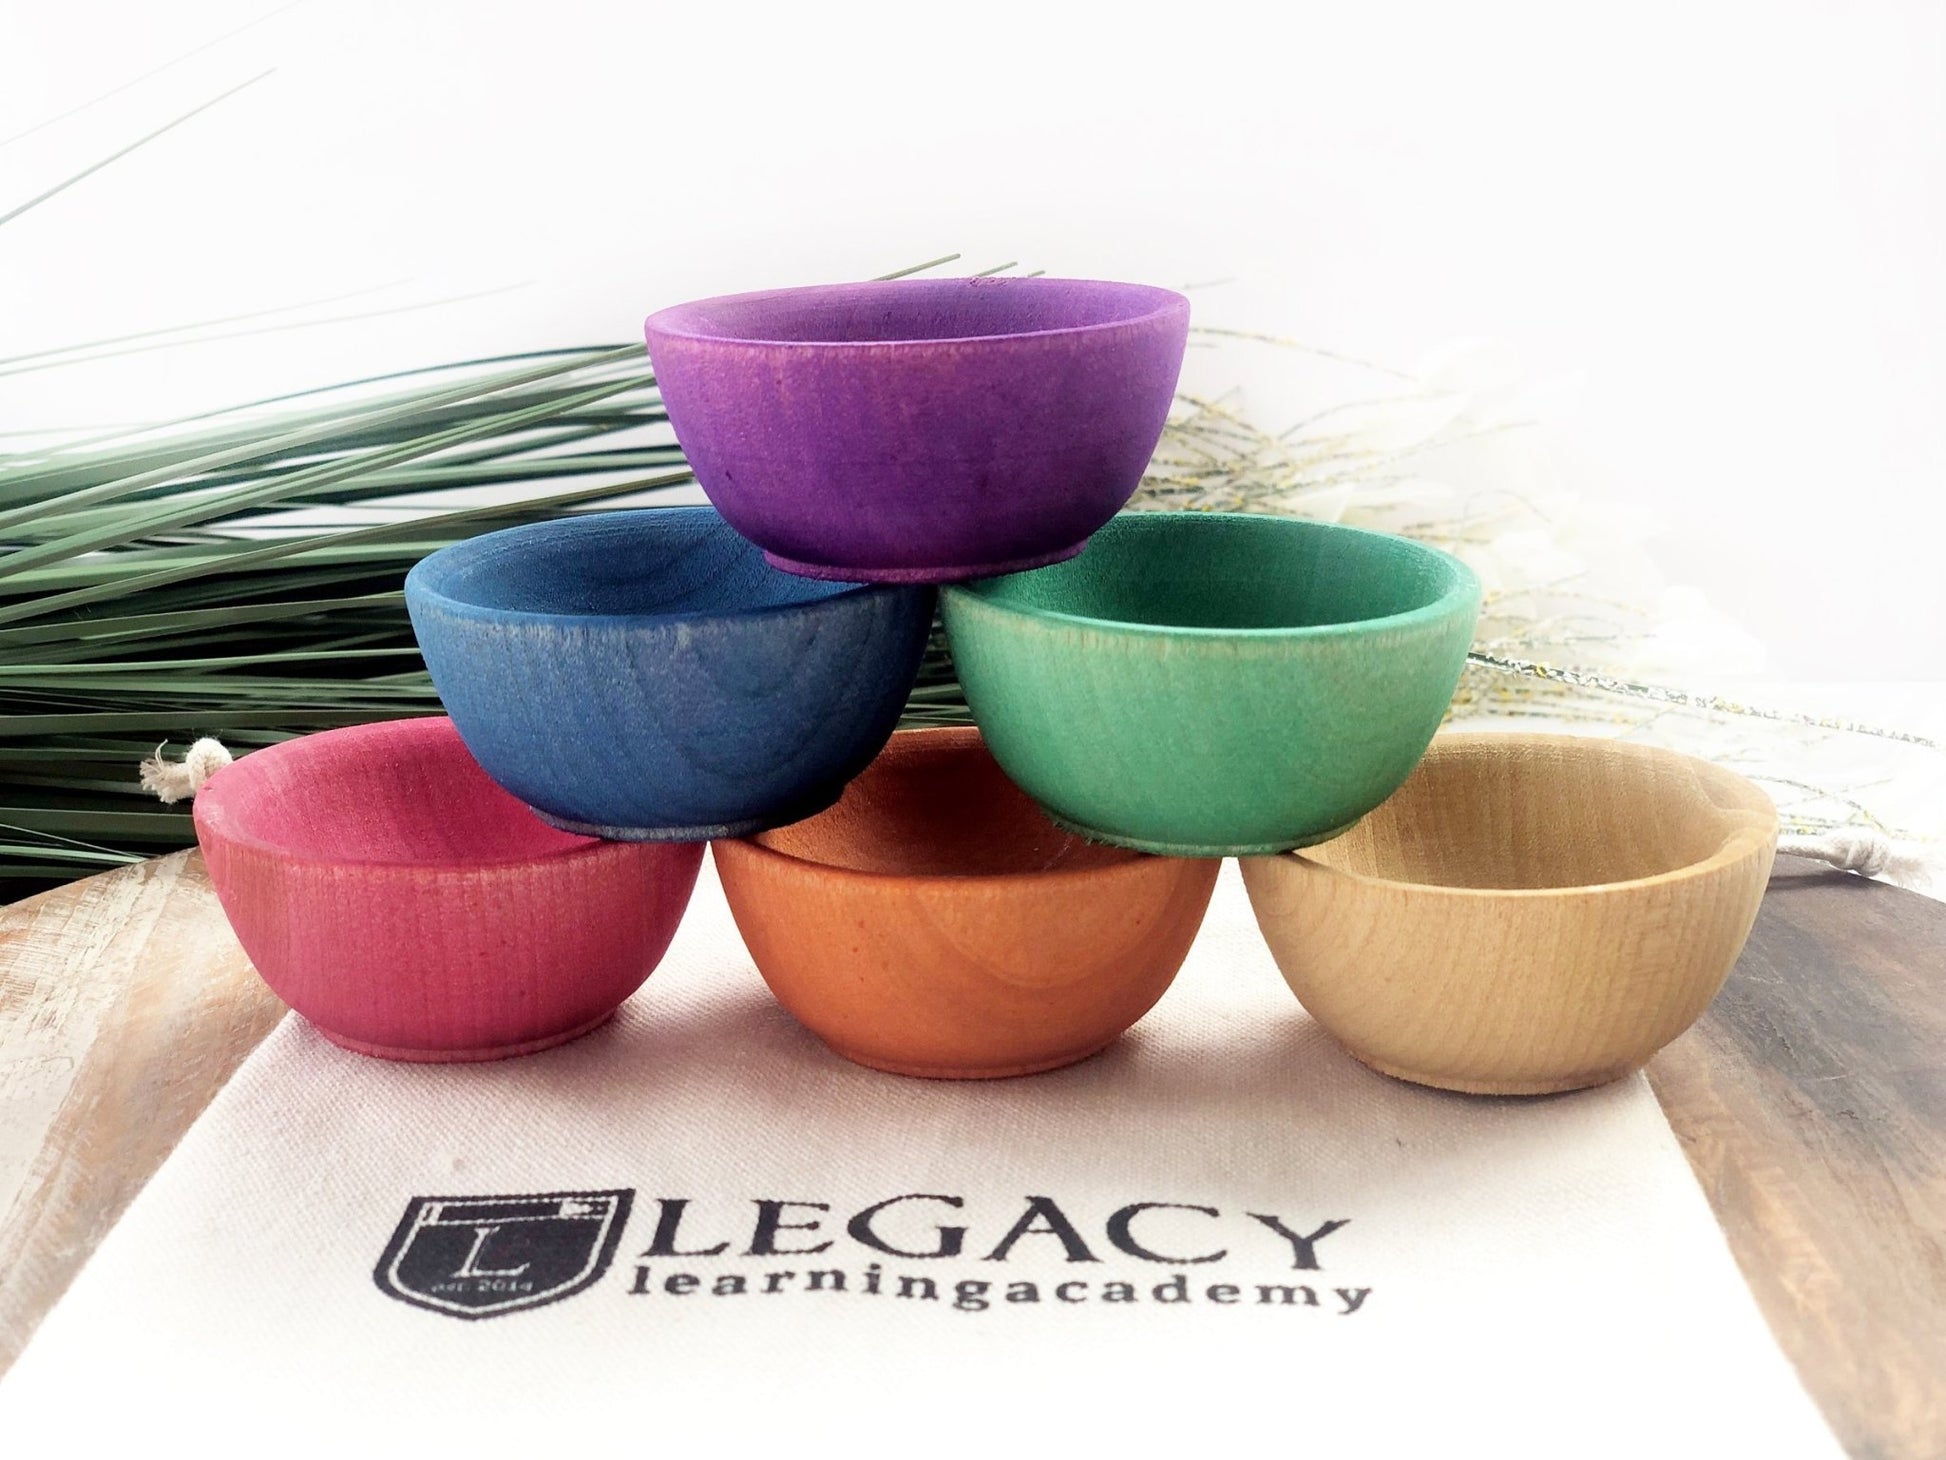 Rainbow Montessori Sorting Bowls by Legacy Learning Academy - Wood Wood Toys Canada's Favourite Montessori Toy Store